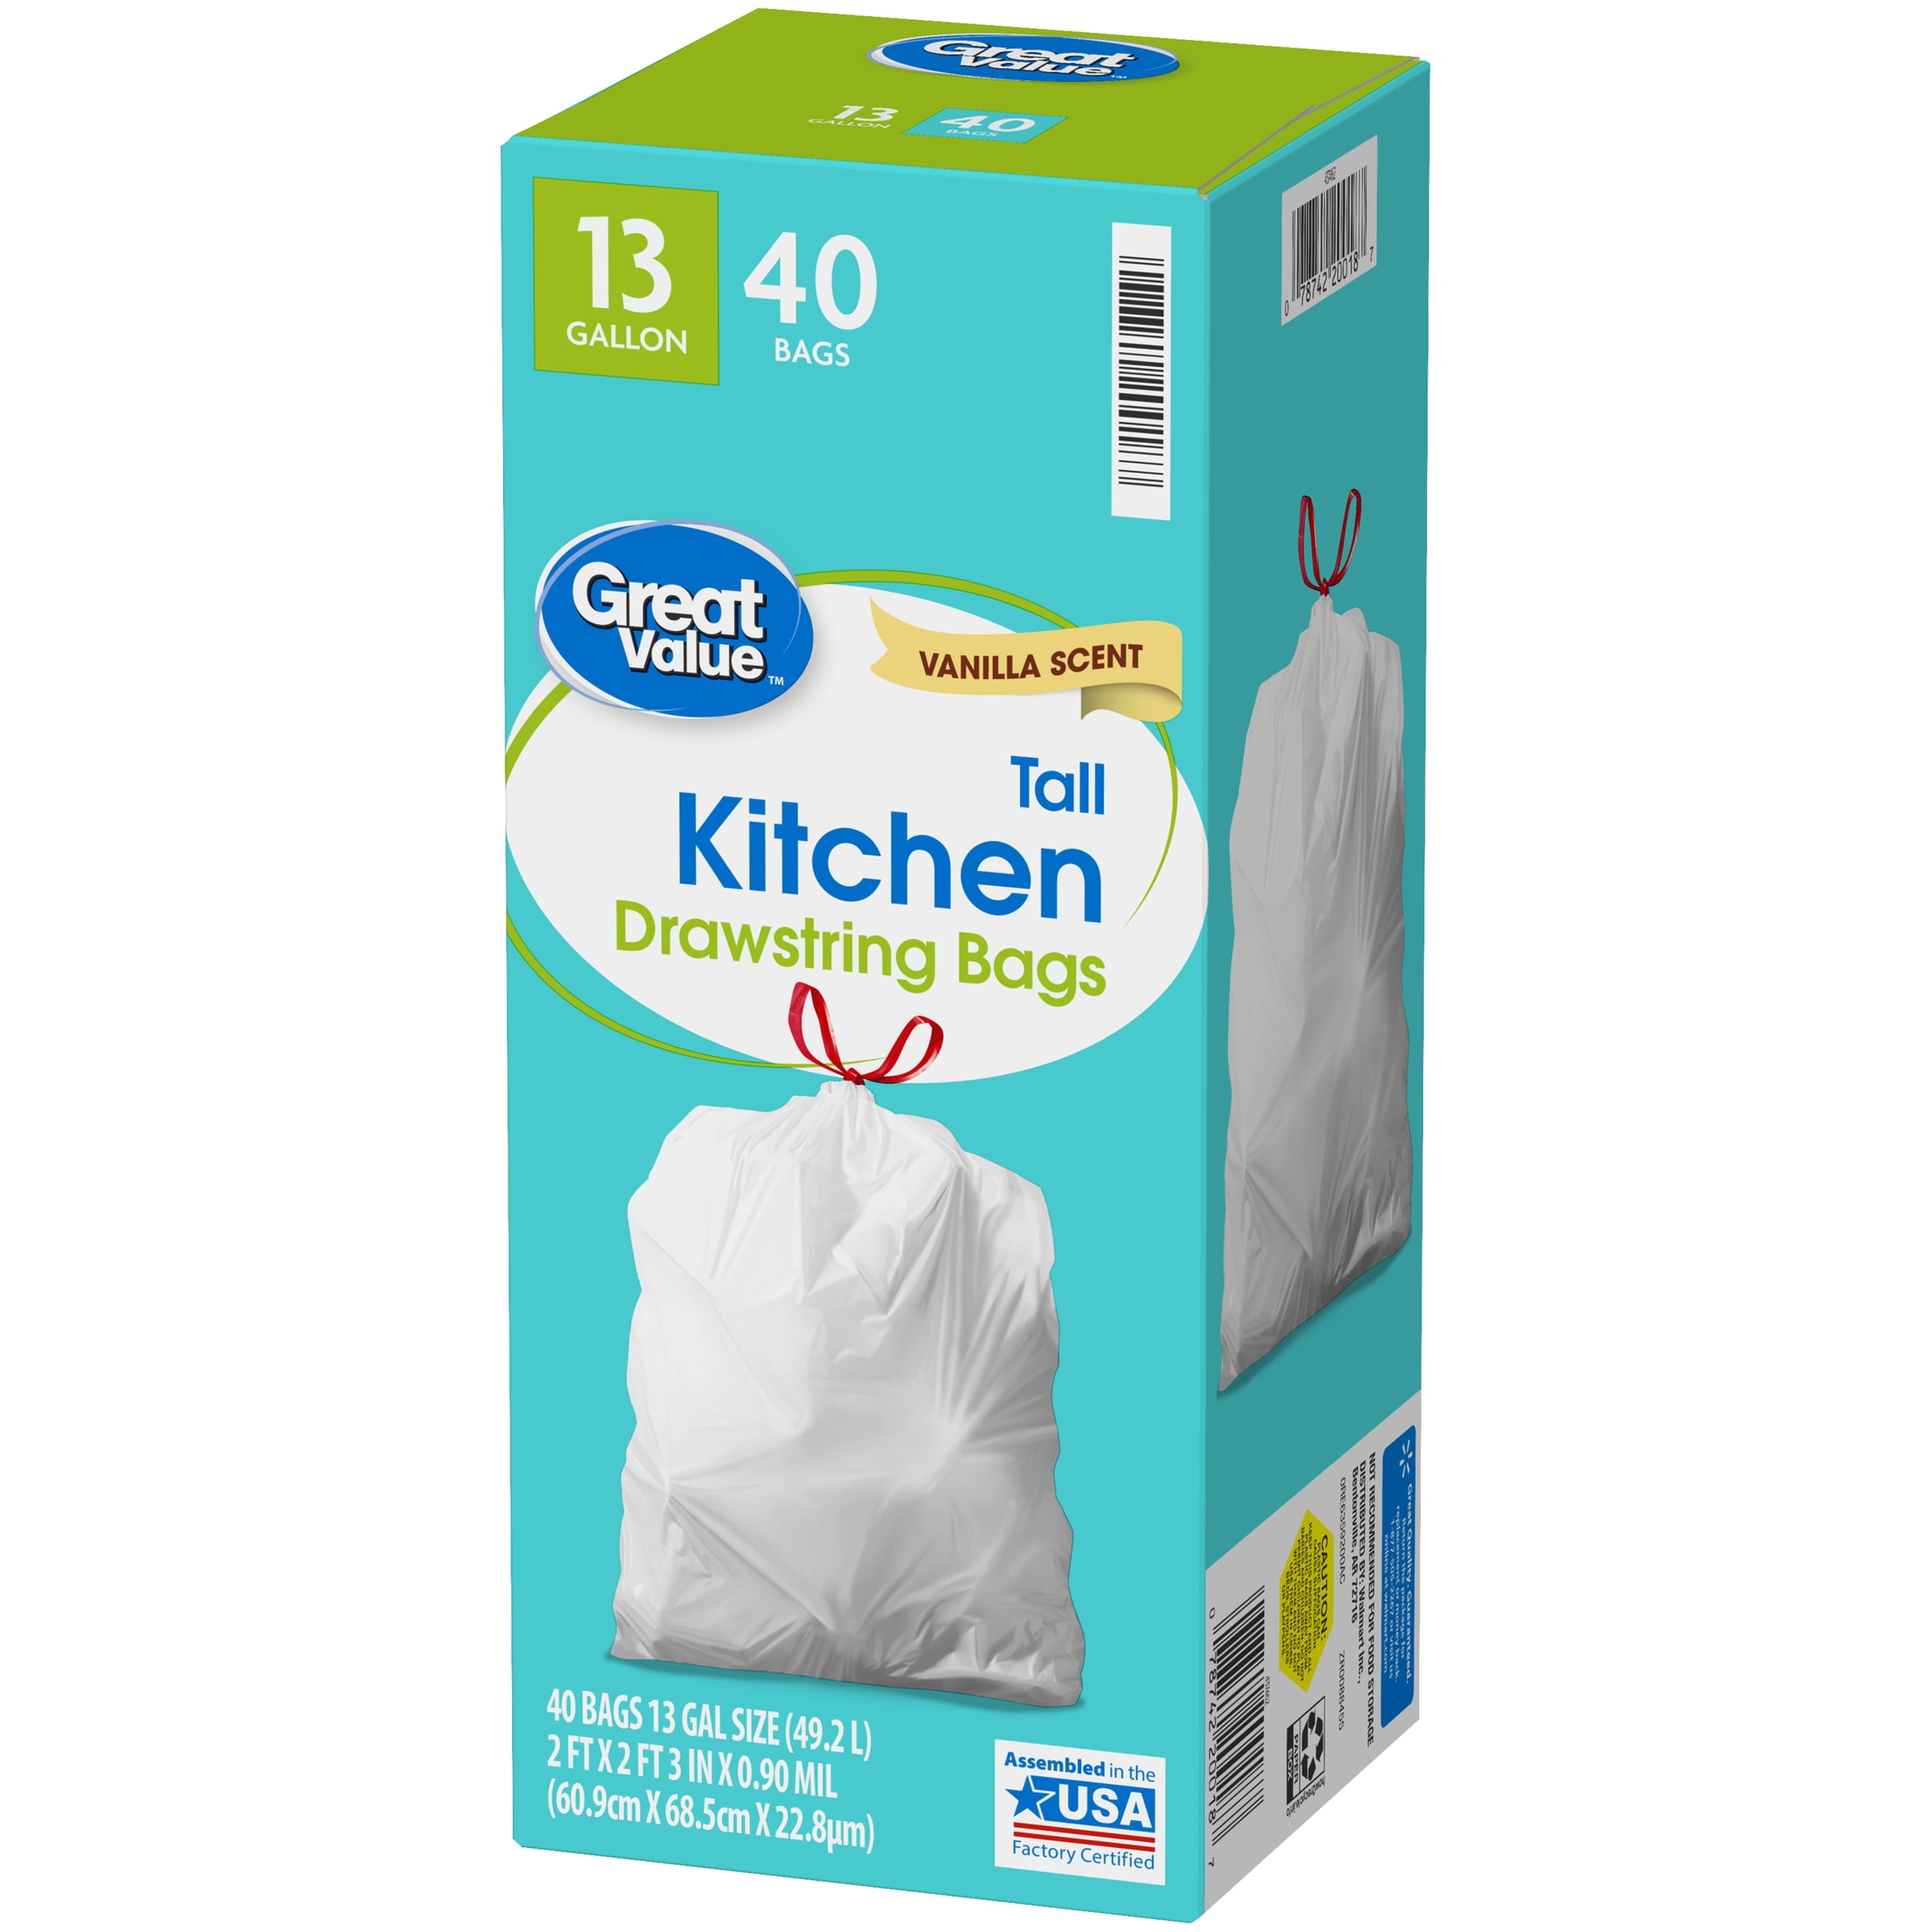 Neat Tall Kitchen 13 Gallon Drawstring Trash Bags - (40 Count) - Triple Ply Fortified, Eco-Friendly 50% Recycled Material, Neutralize+ Odor